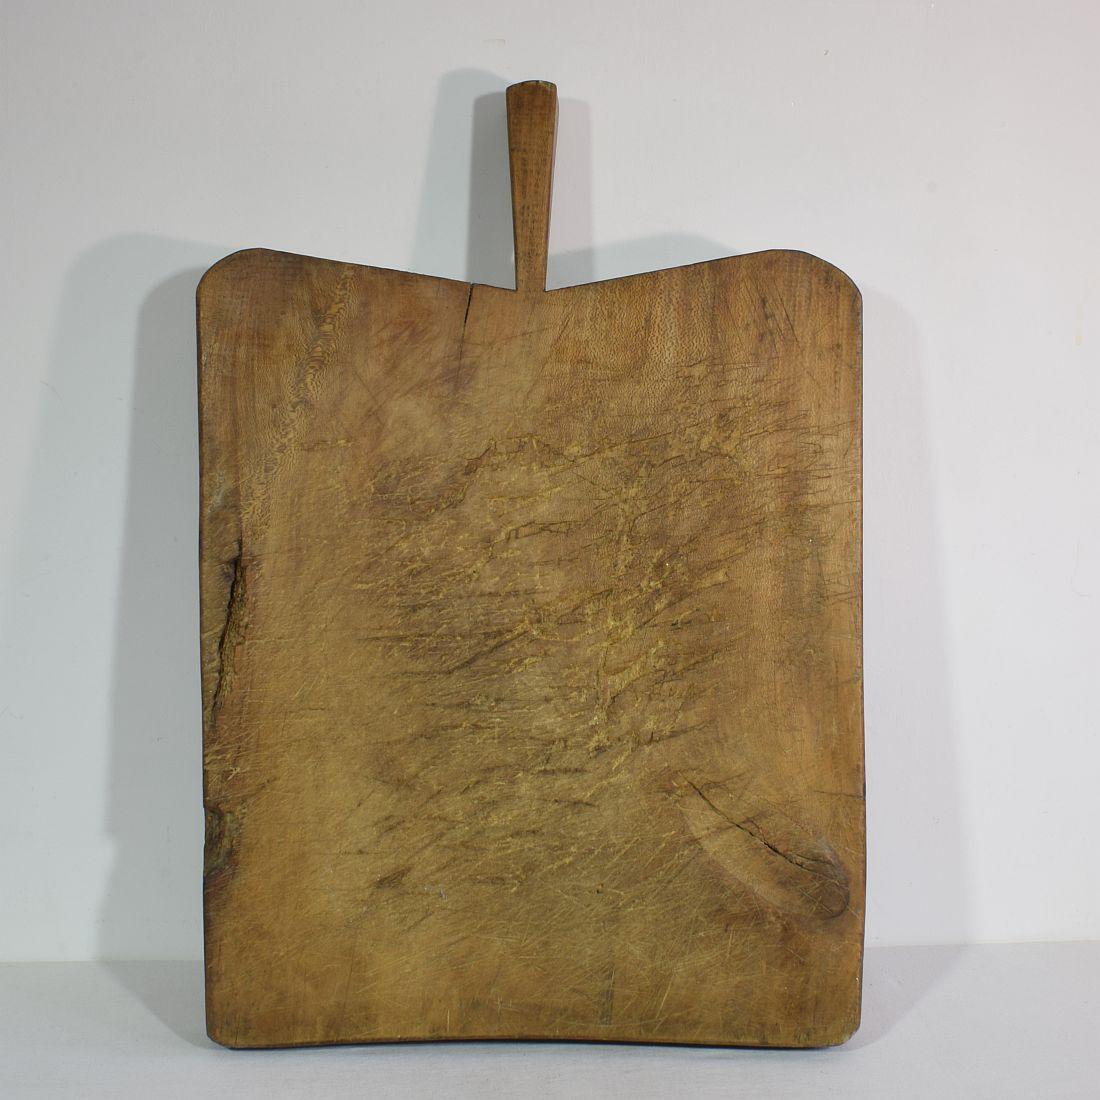 Giant 19th Century, French Wooden Chopping or Cutting Board 3